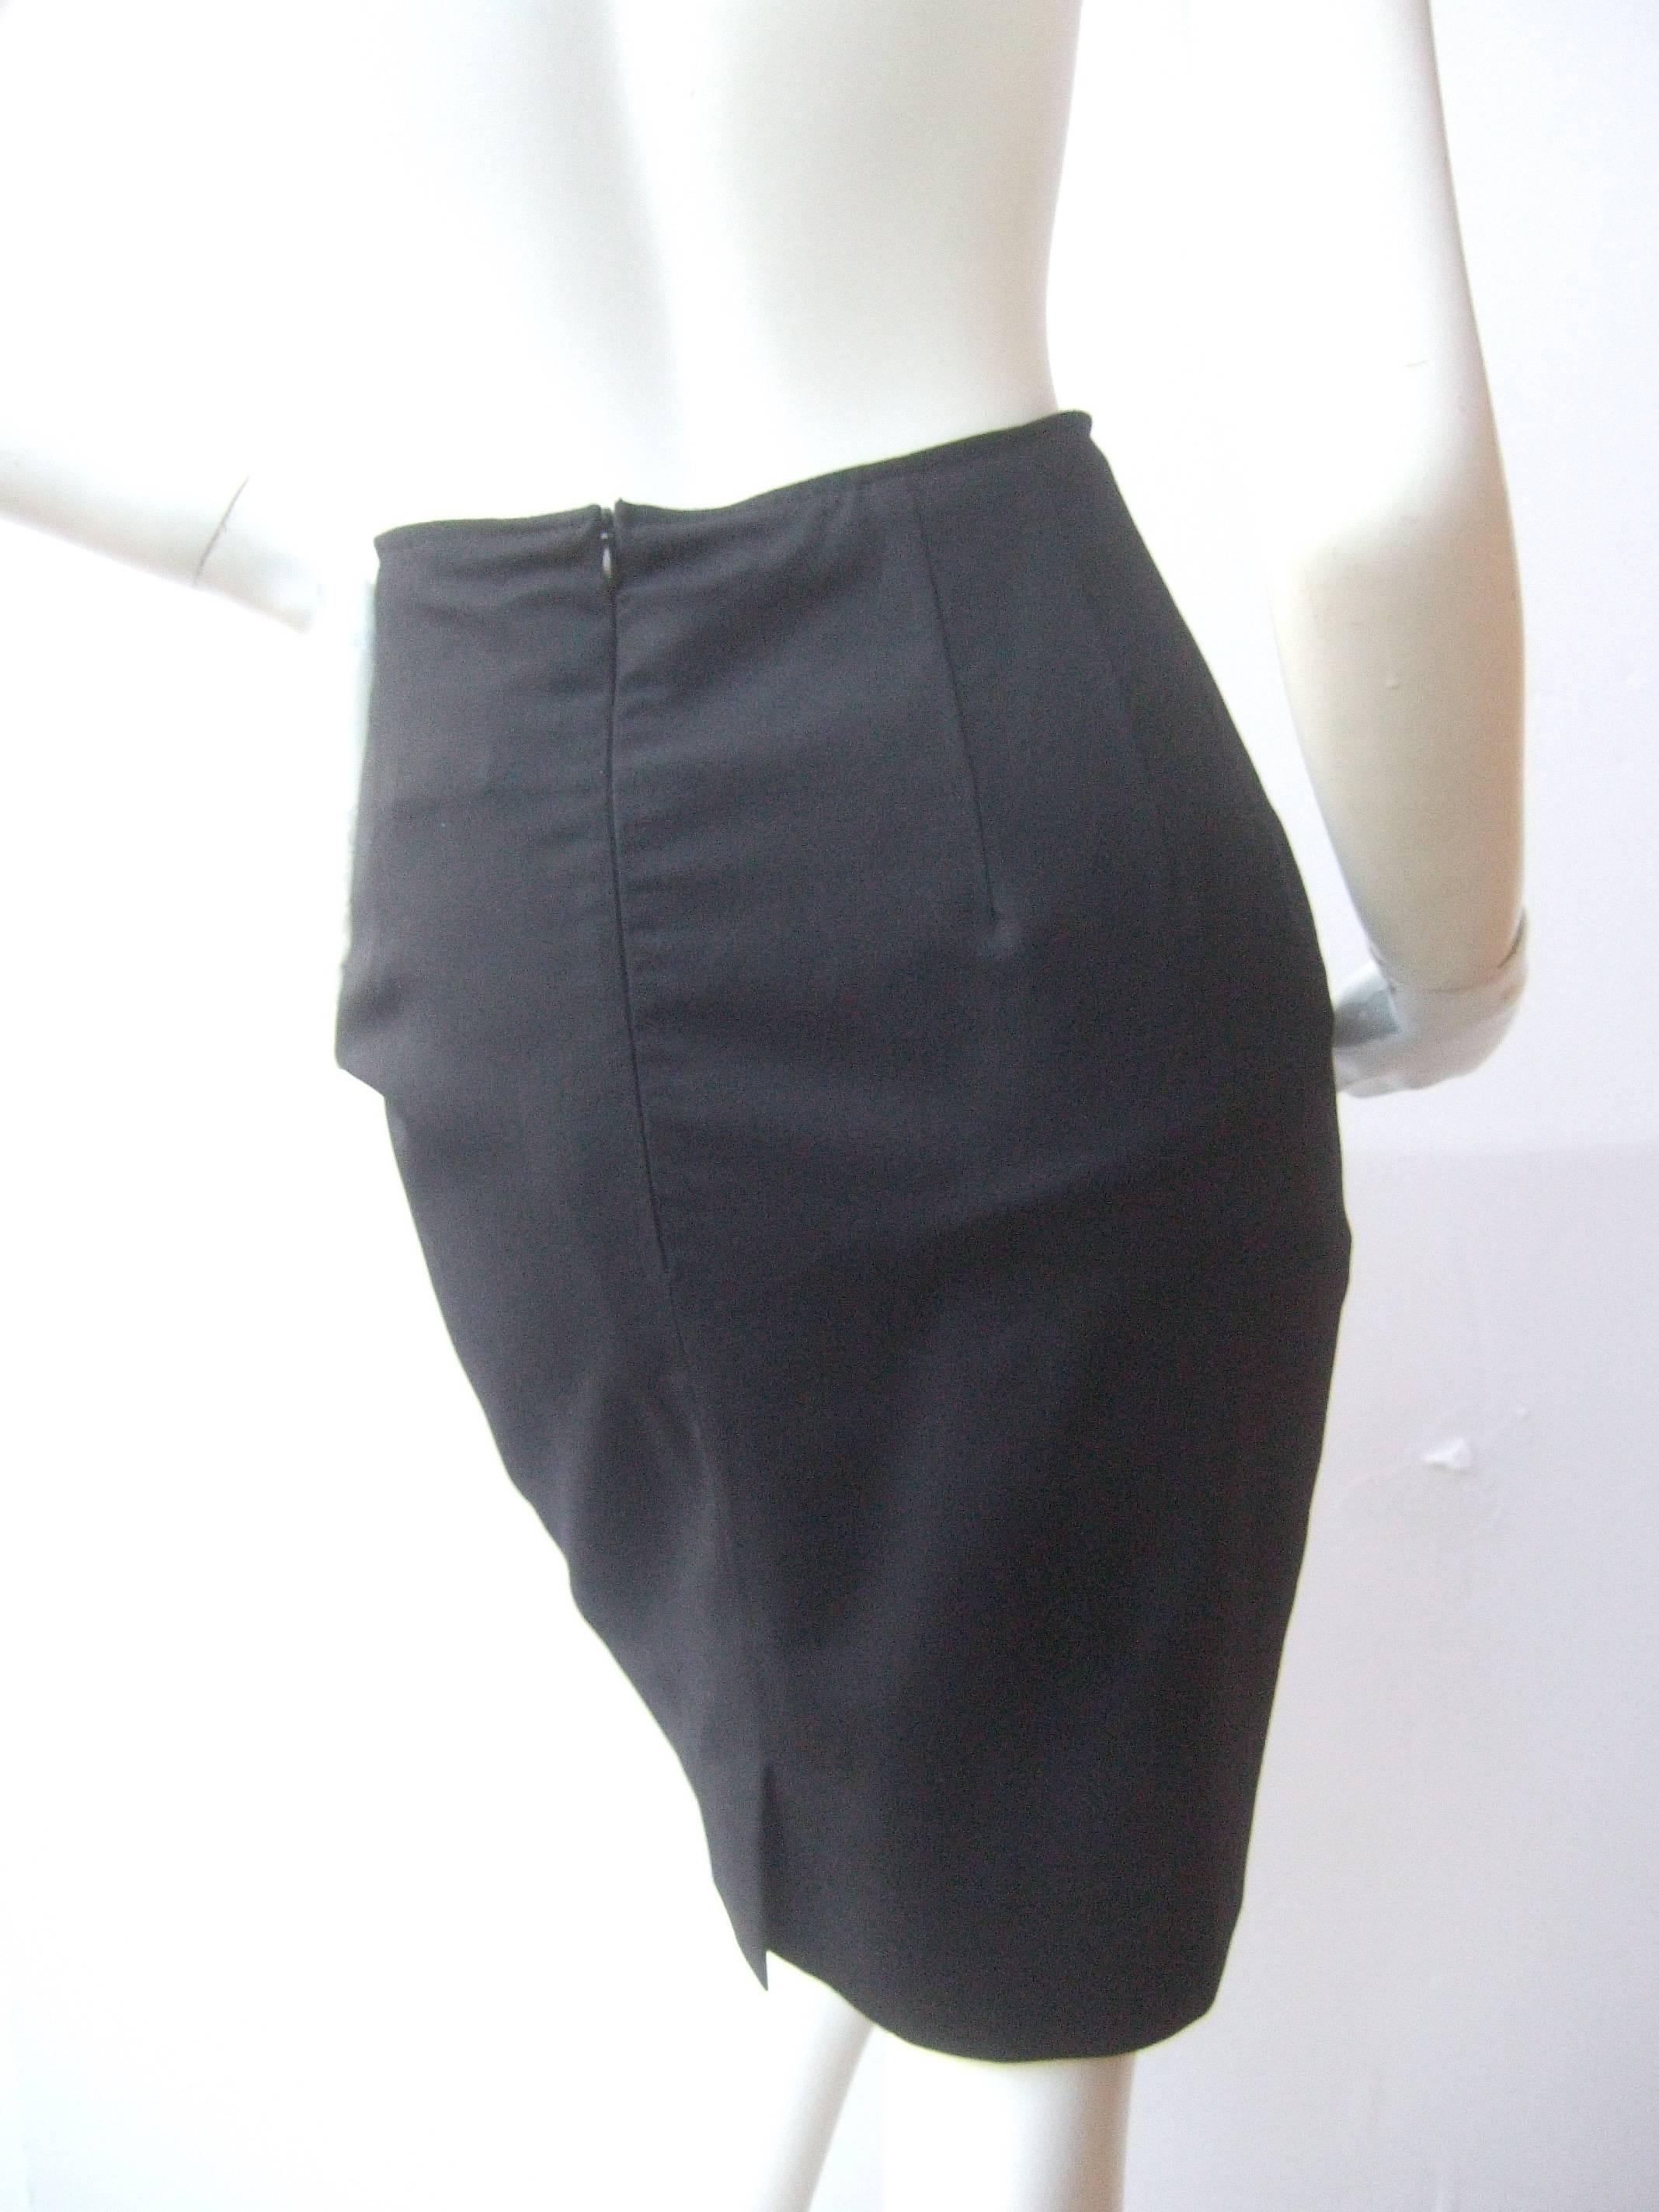 Chanel Boutique Dark Blue Wool Pencil Skirt with Chanel Buttons c 1990s 5